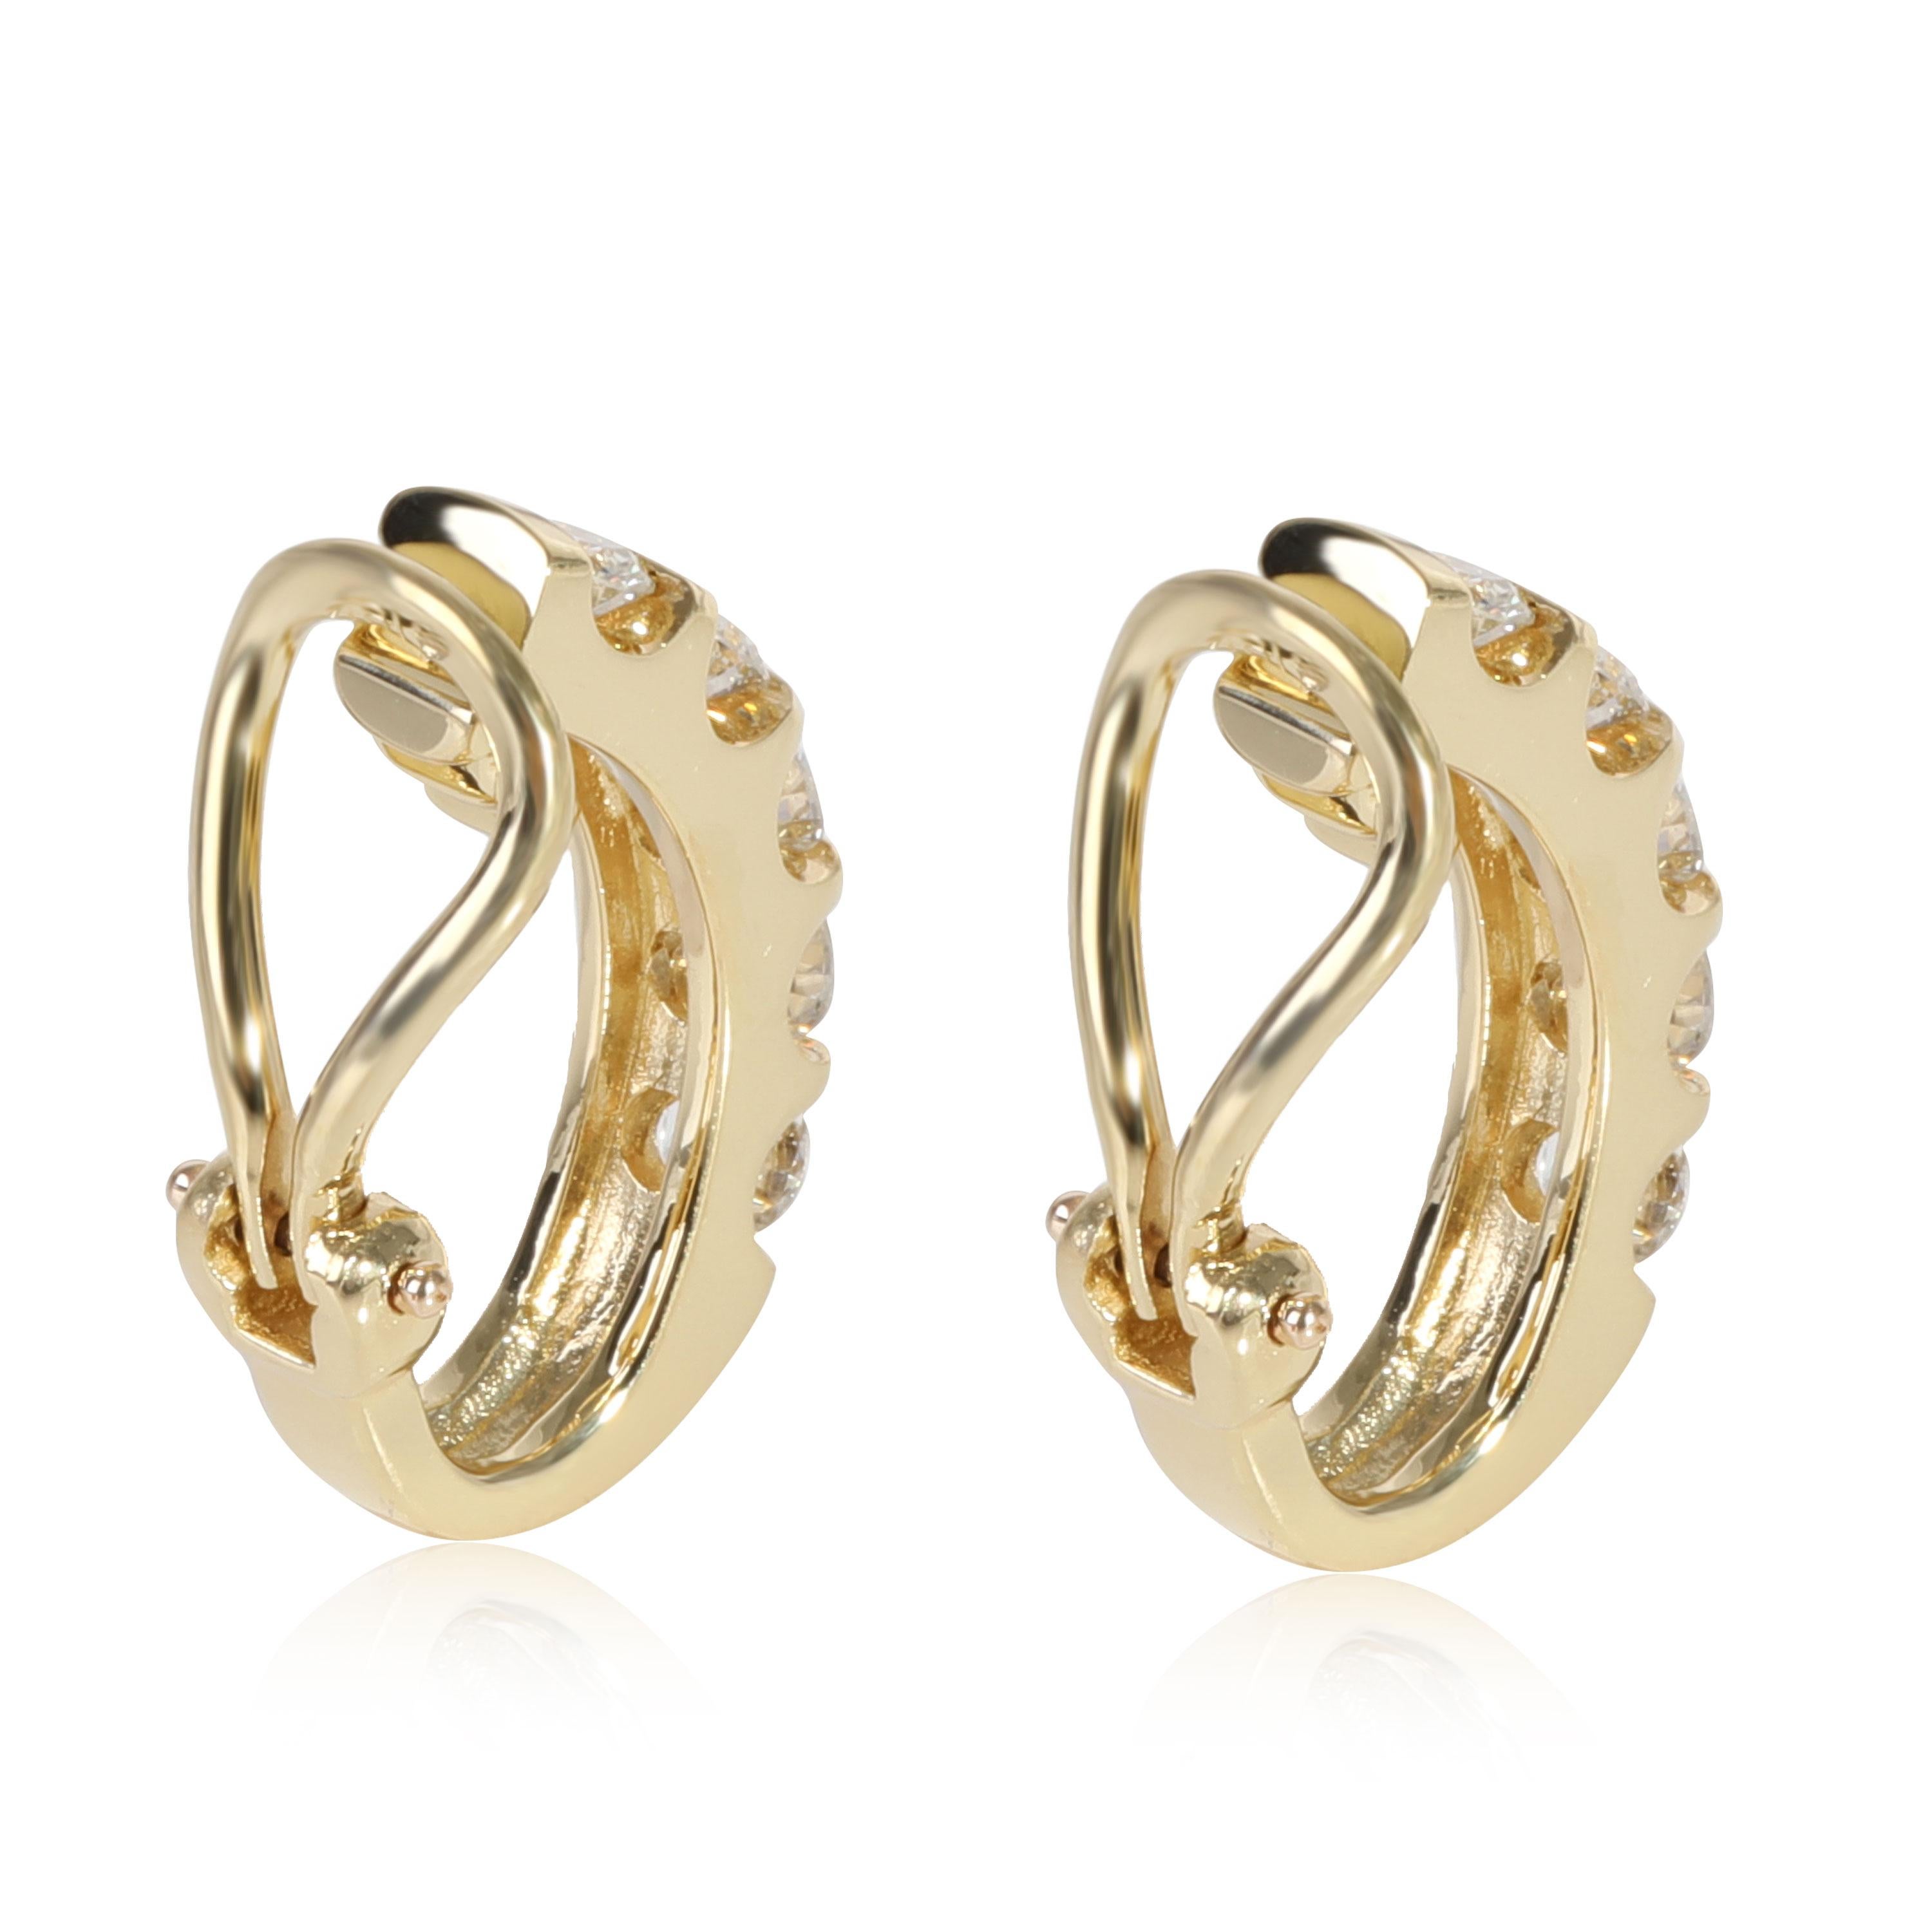 Diamond J Hoop Earrings in 18k Yellow Gold 1.5 CTW

PRIMARY DETAILS
SKU: 117847
Listing Title: Diamond J Hoop Earrings in 18k Yellow Gold 1.5 CTW
Condition Description: Retails for 4995 USD. In excellent condition and recently polished.
Metal Type: